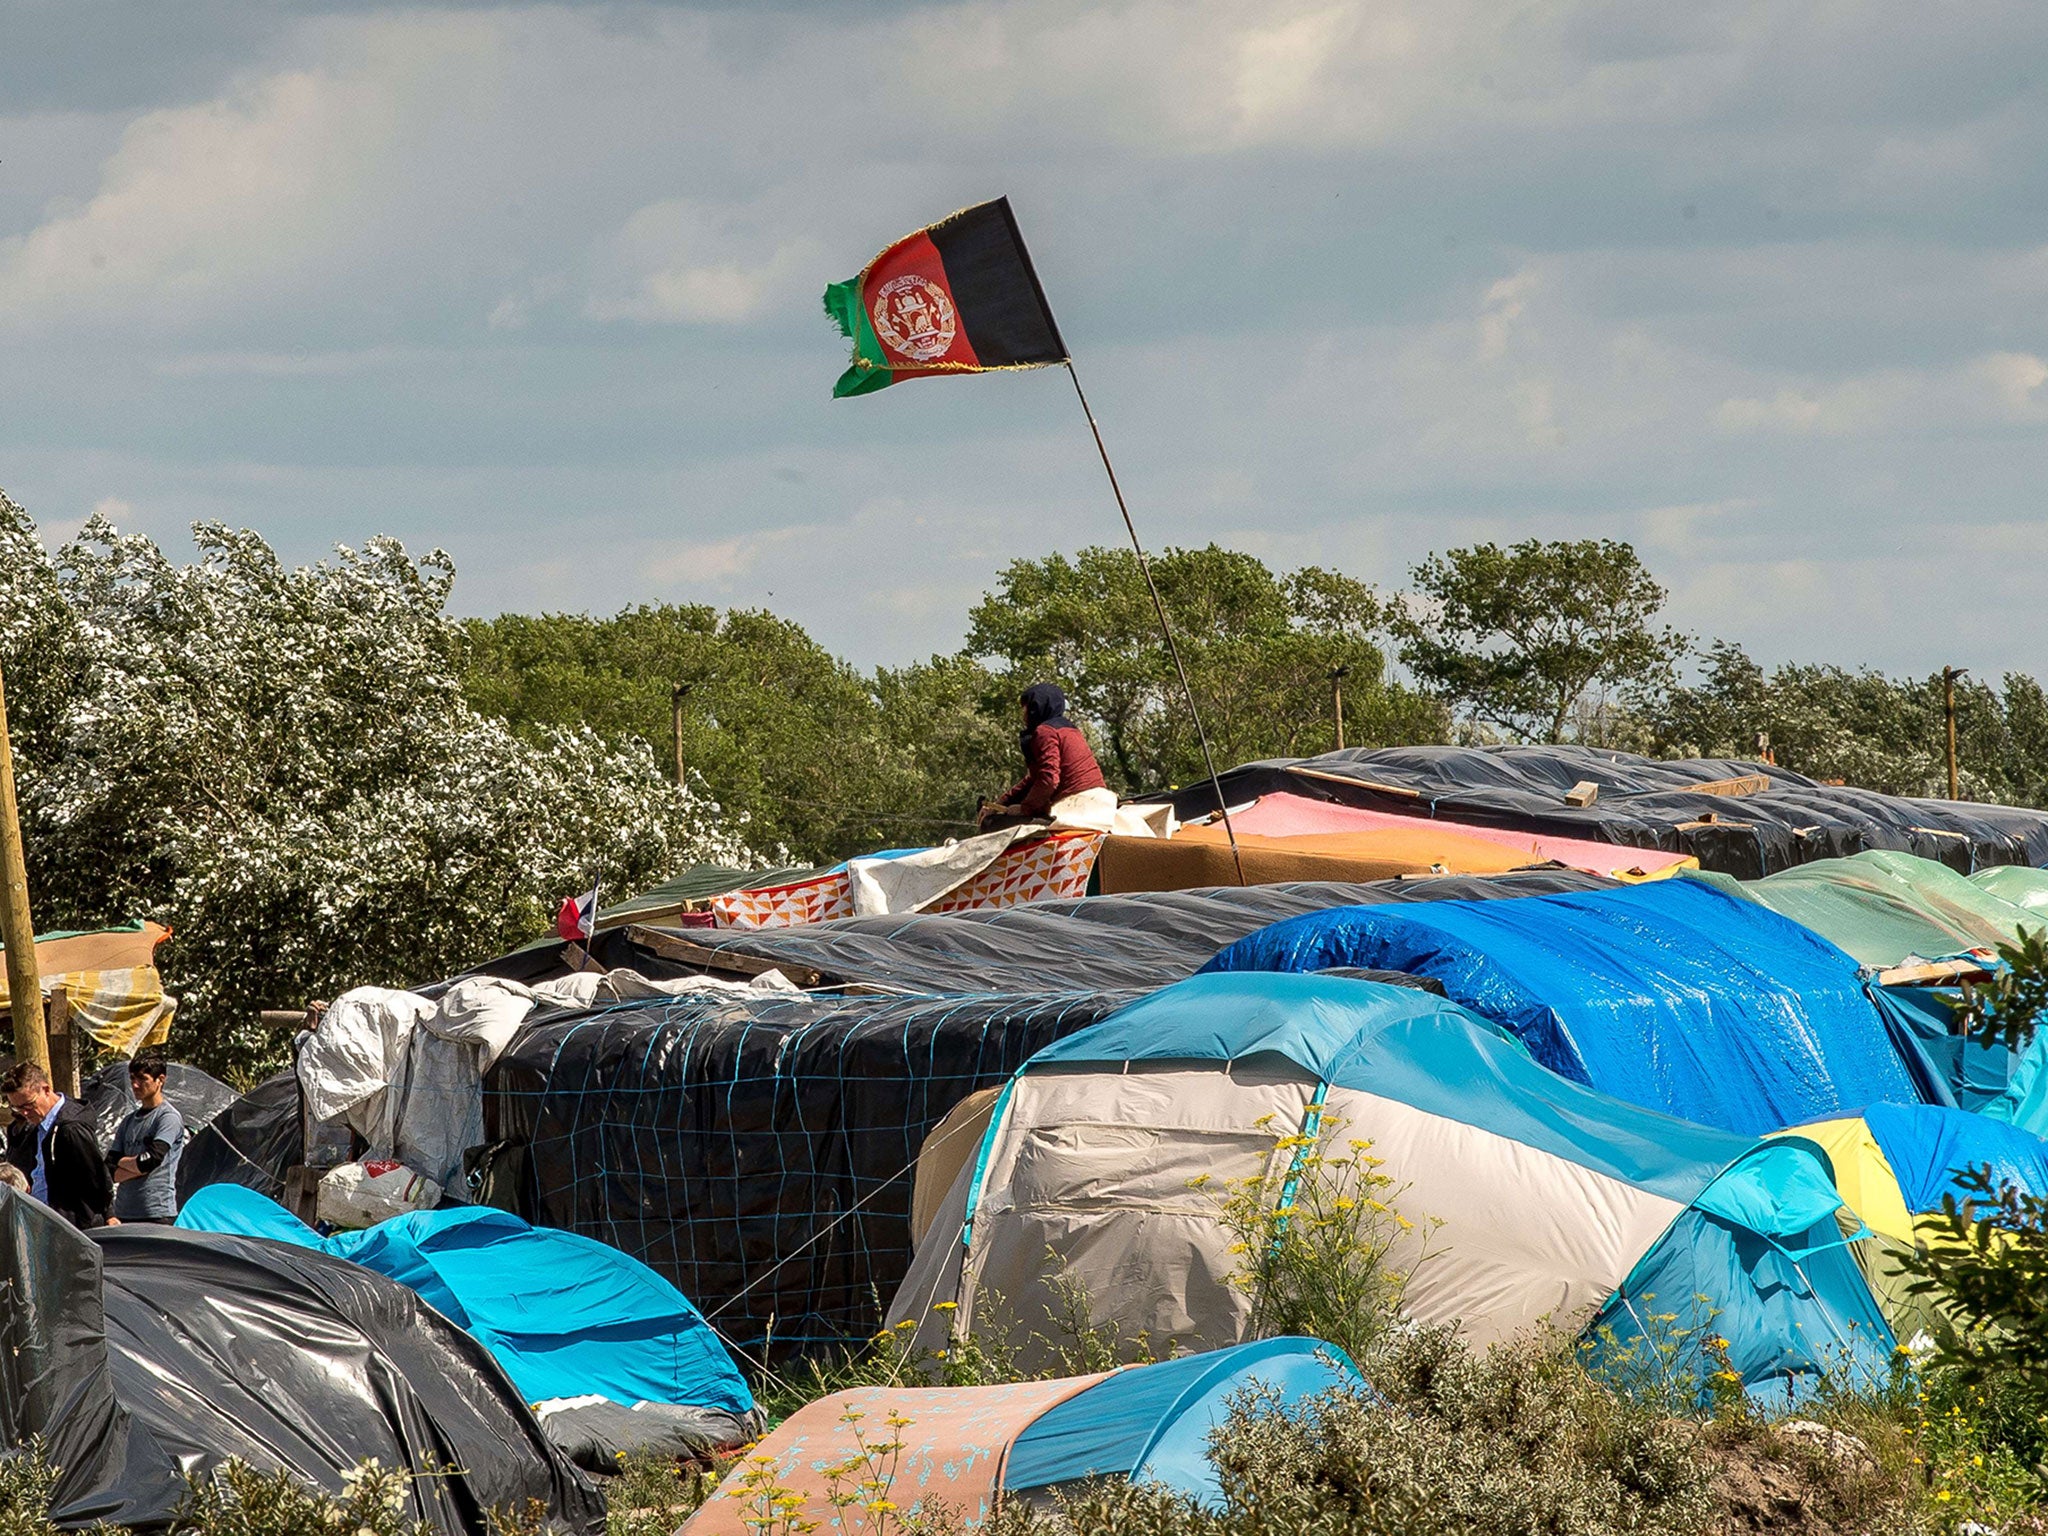 An Afghan flag flies above makeshift shelters at a site dubbed the 'new jungle', where migrants trying to cross the Channel to reach Britain have camped out around the northern French port of Calais, on July 29, 2015